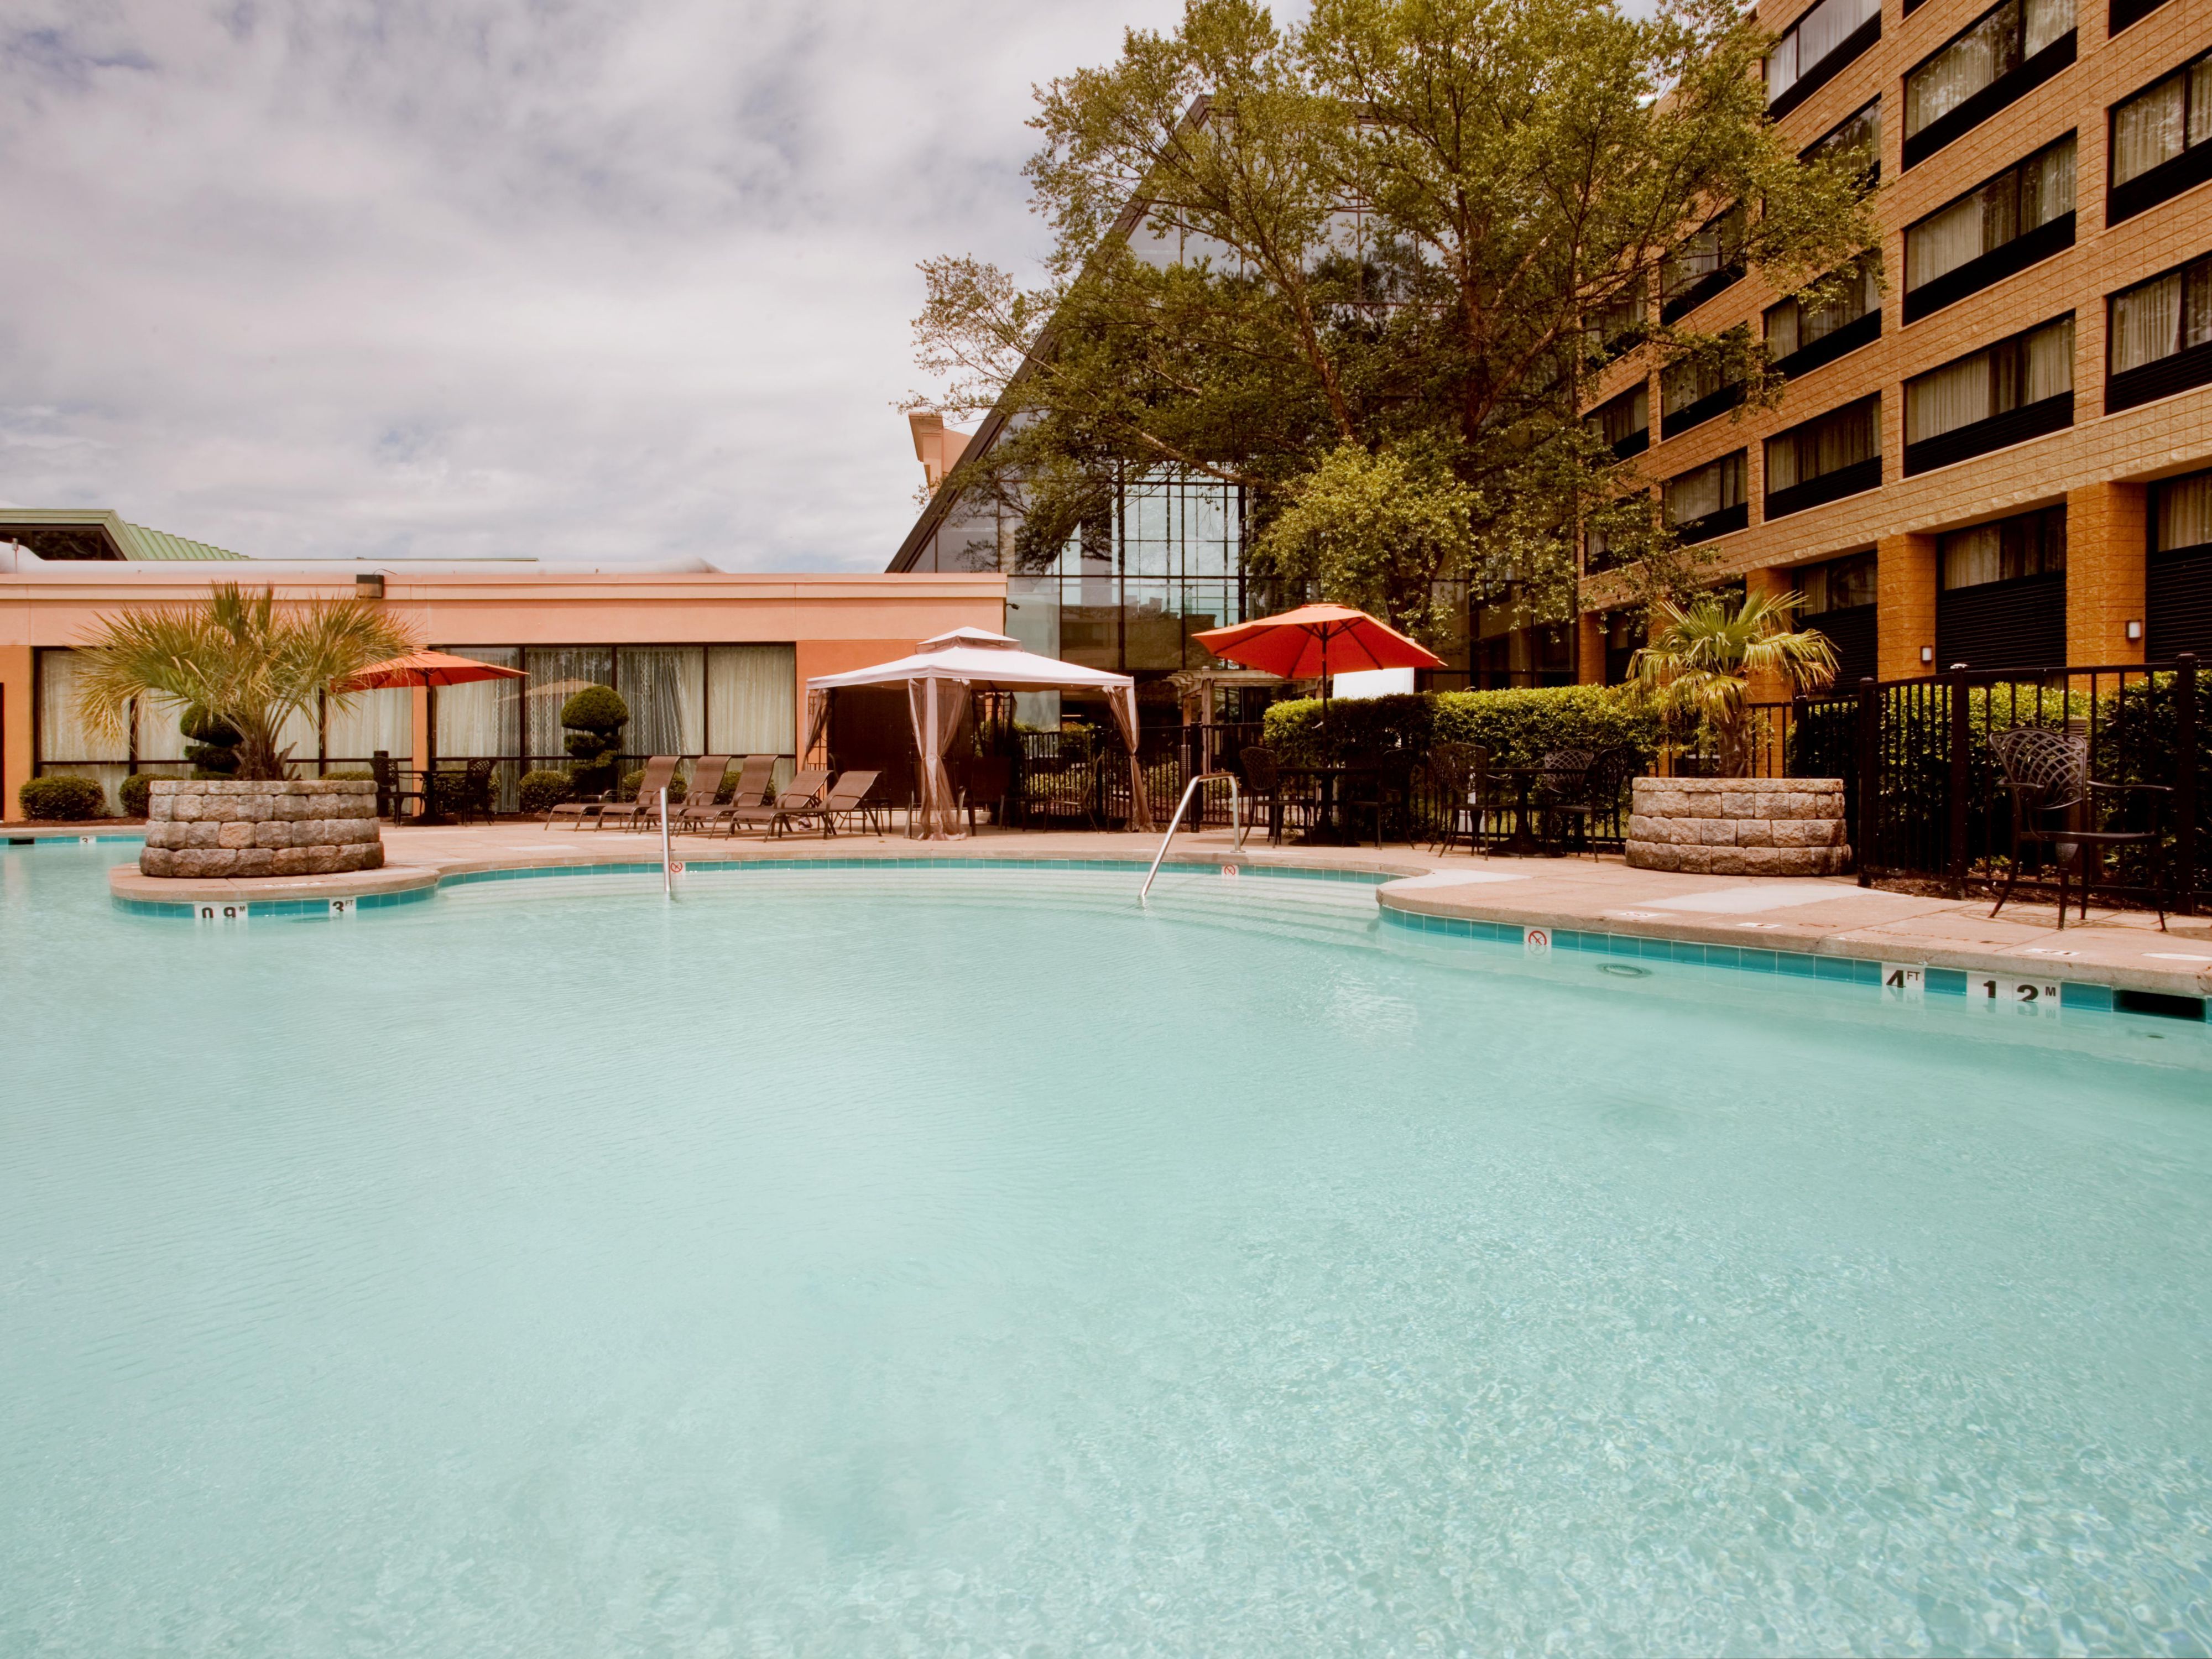 Summer is here and our Outdoor Pool is the perfect place to take a splash and relax.  